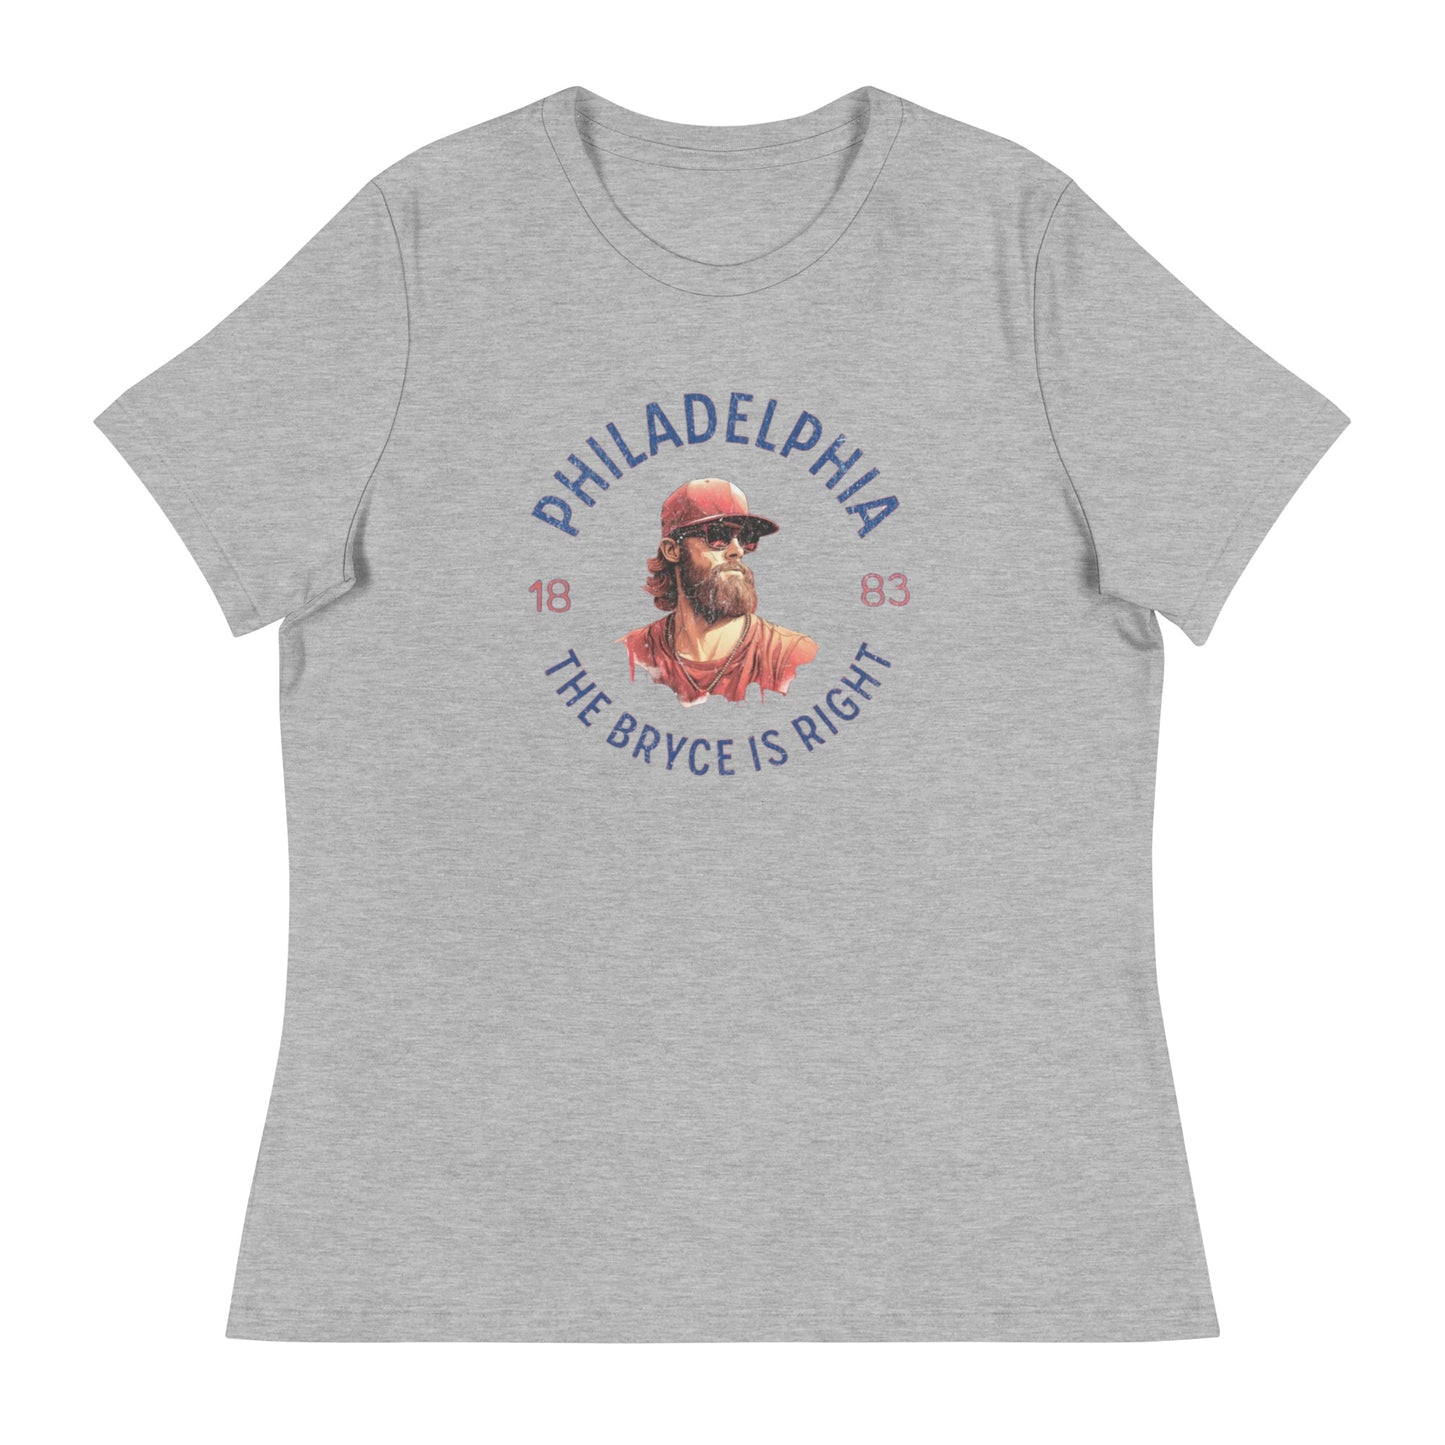 The Bryce is Right Women's Tee